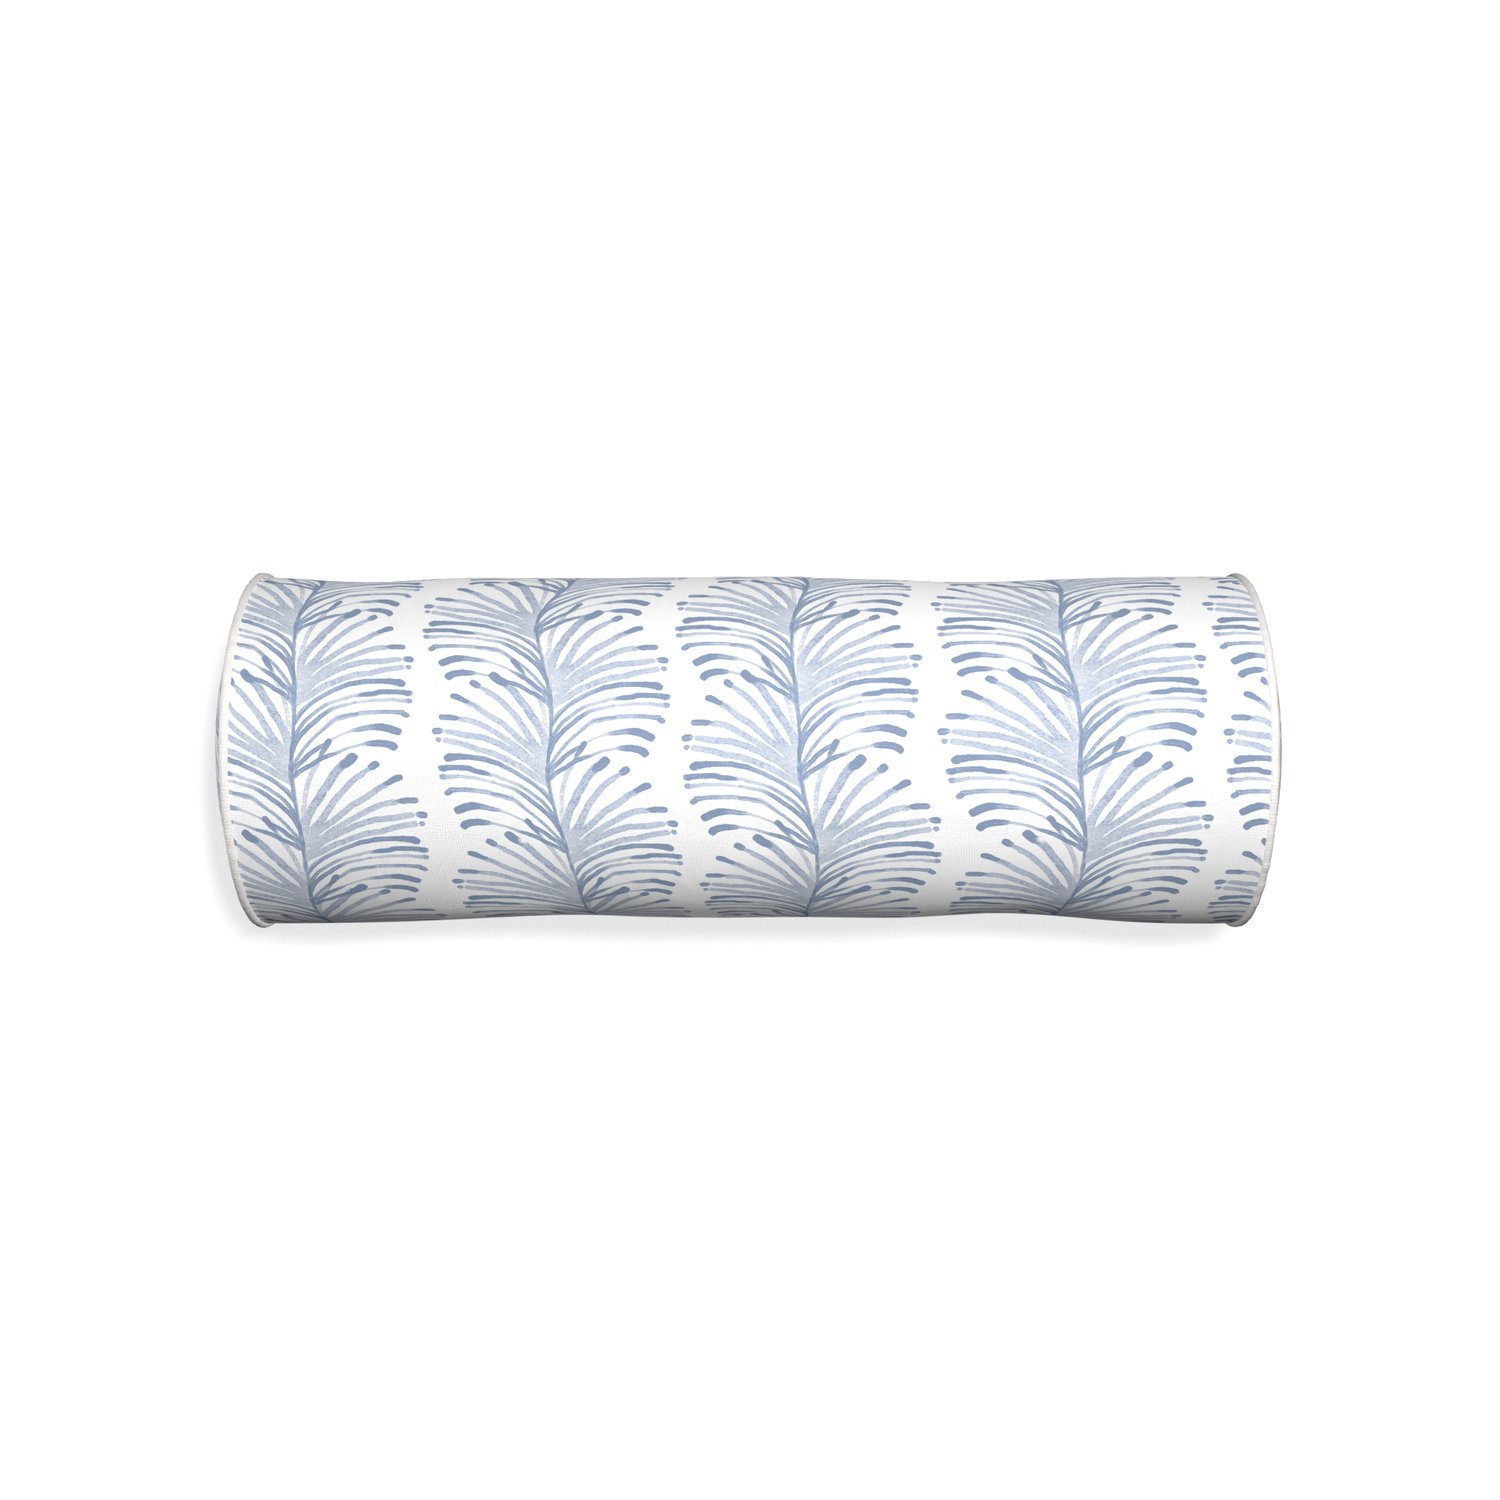 Bolster emma sky custom sky blue botanical stripepillow with snow piping on white background